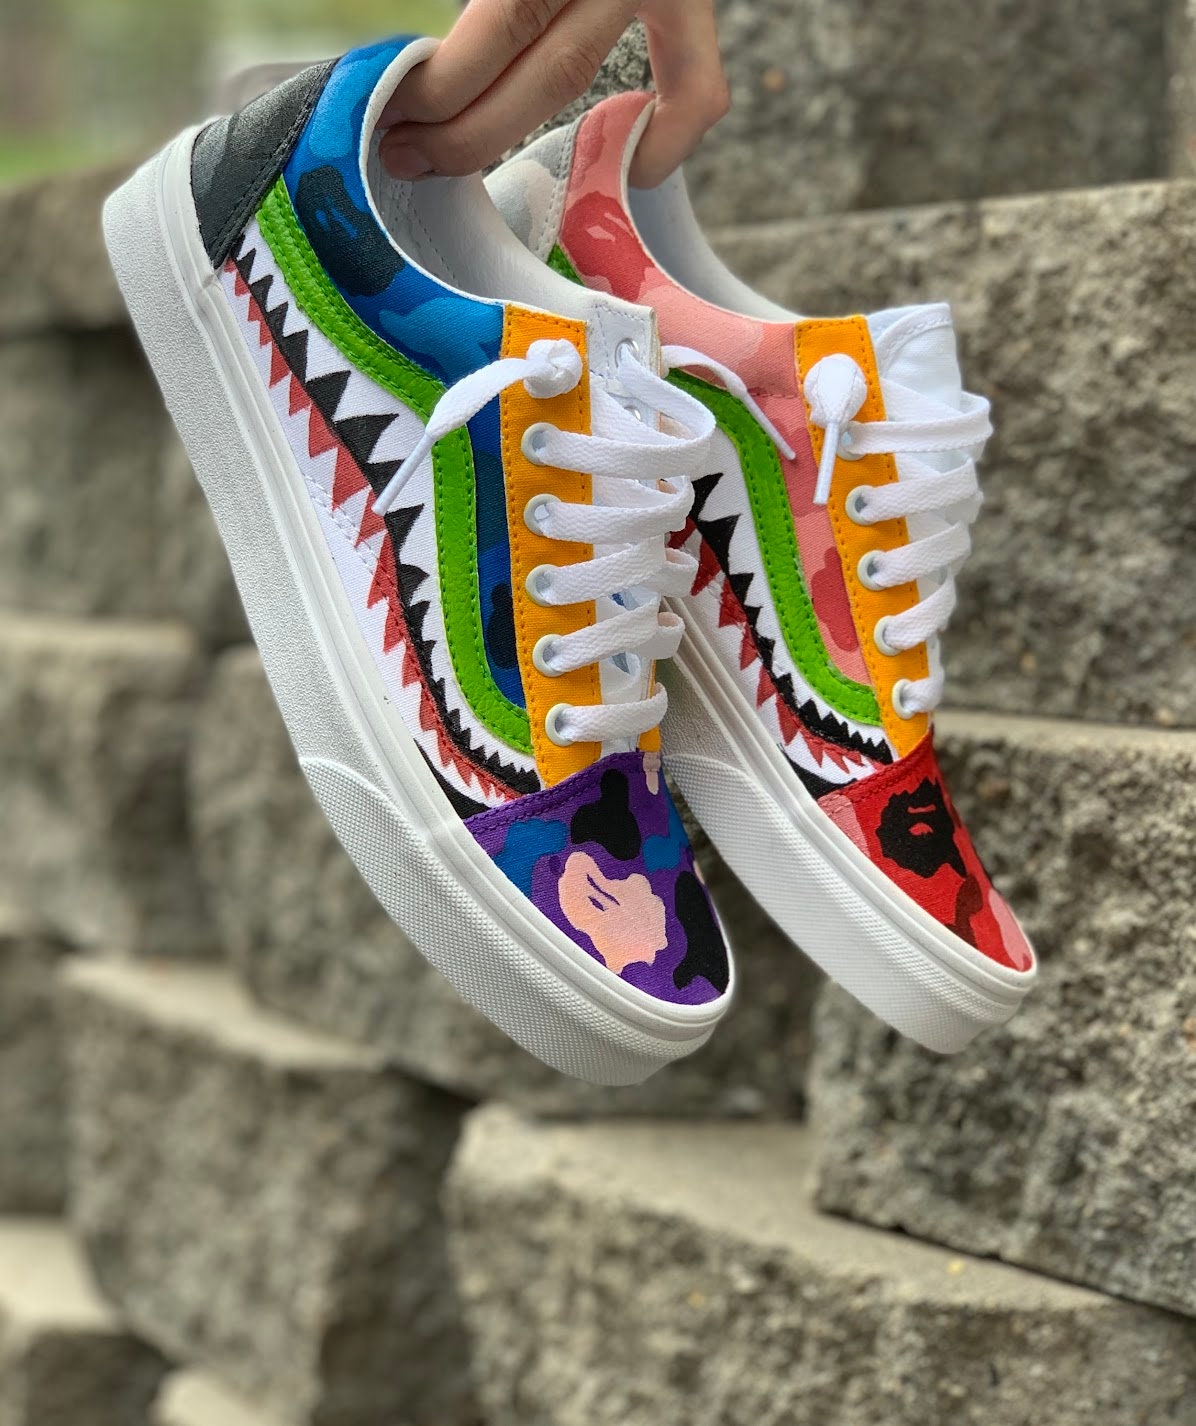  Black Old Skool x Shark Teeth Pattern Custom Handmade Shoes By  Patch Collection : Handmade Products